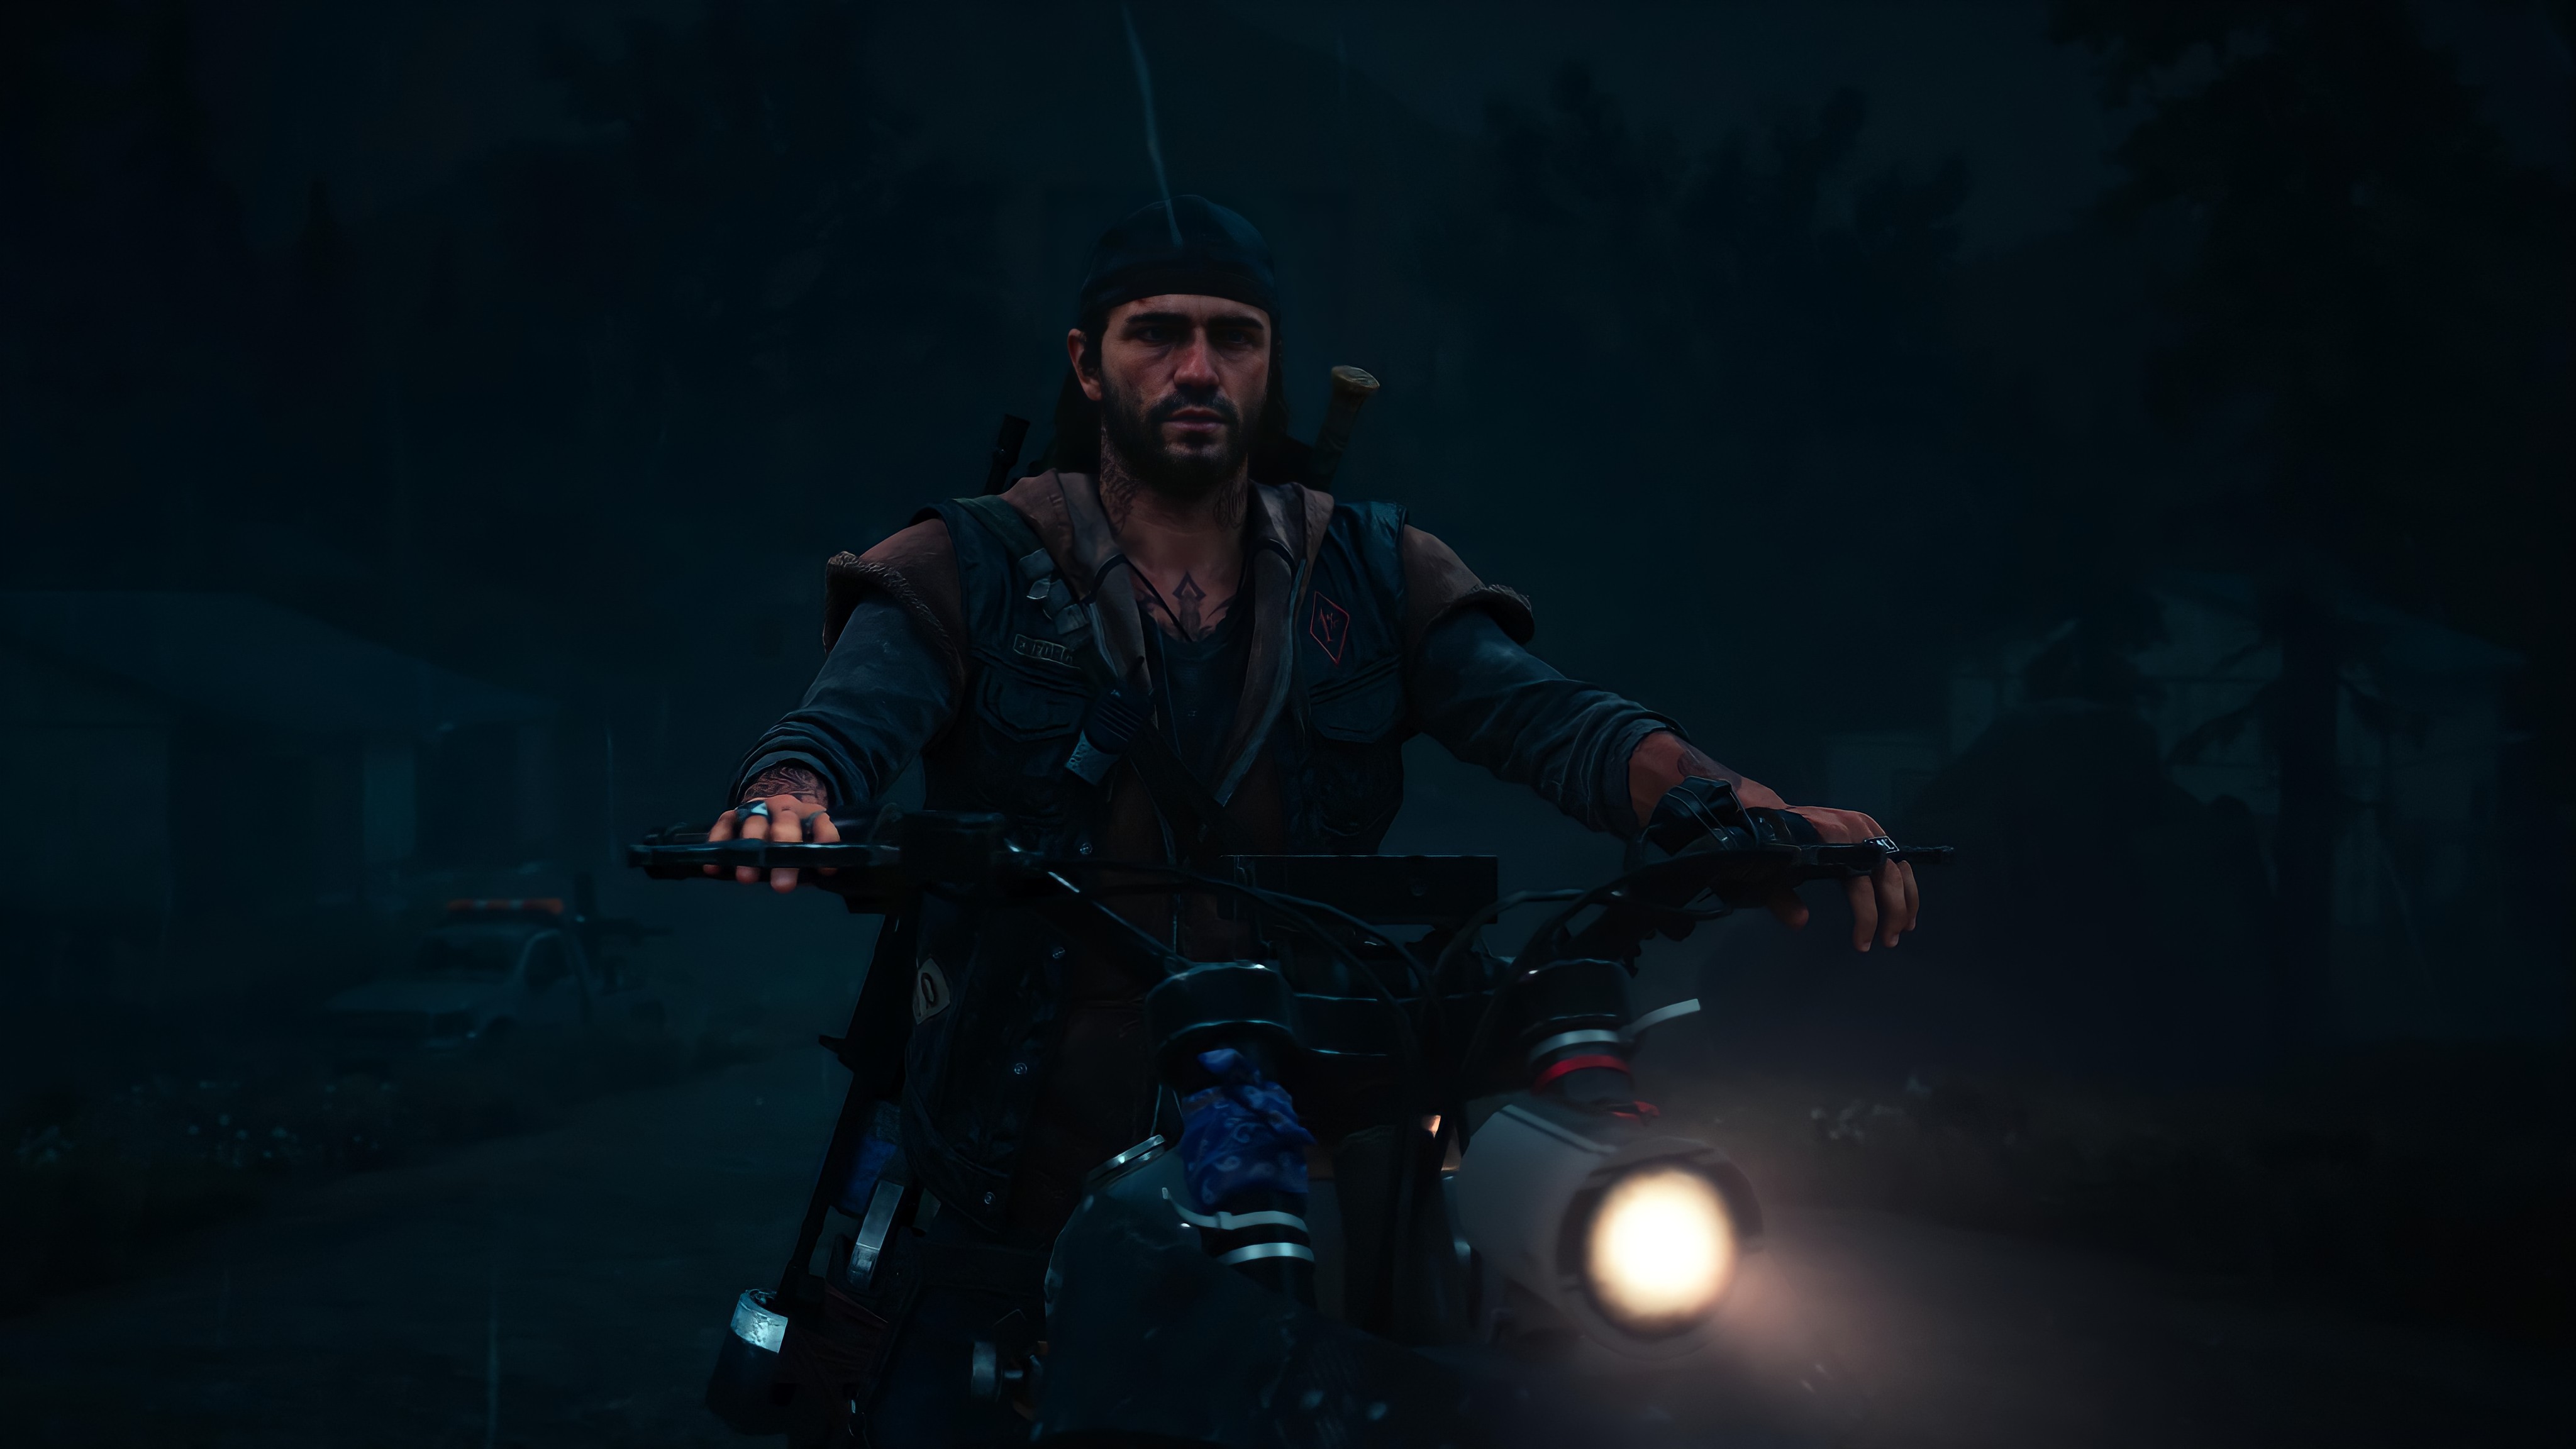 Video Games Days Gone PlayStation Playstation 5 PlayStation Share Motorcycle Deacon St John Deacon V 4096x2304